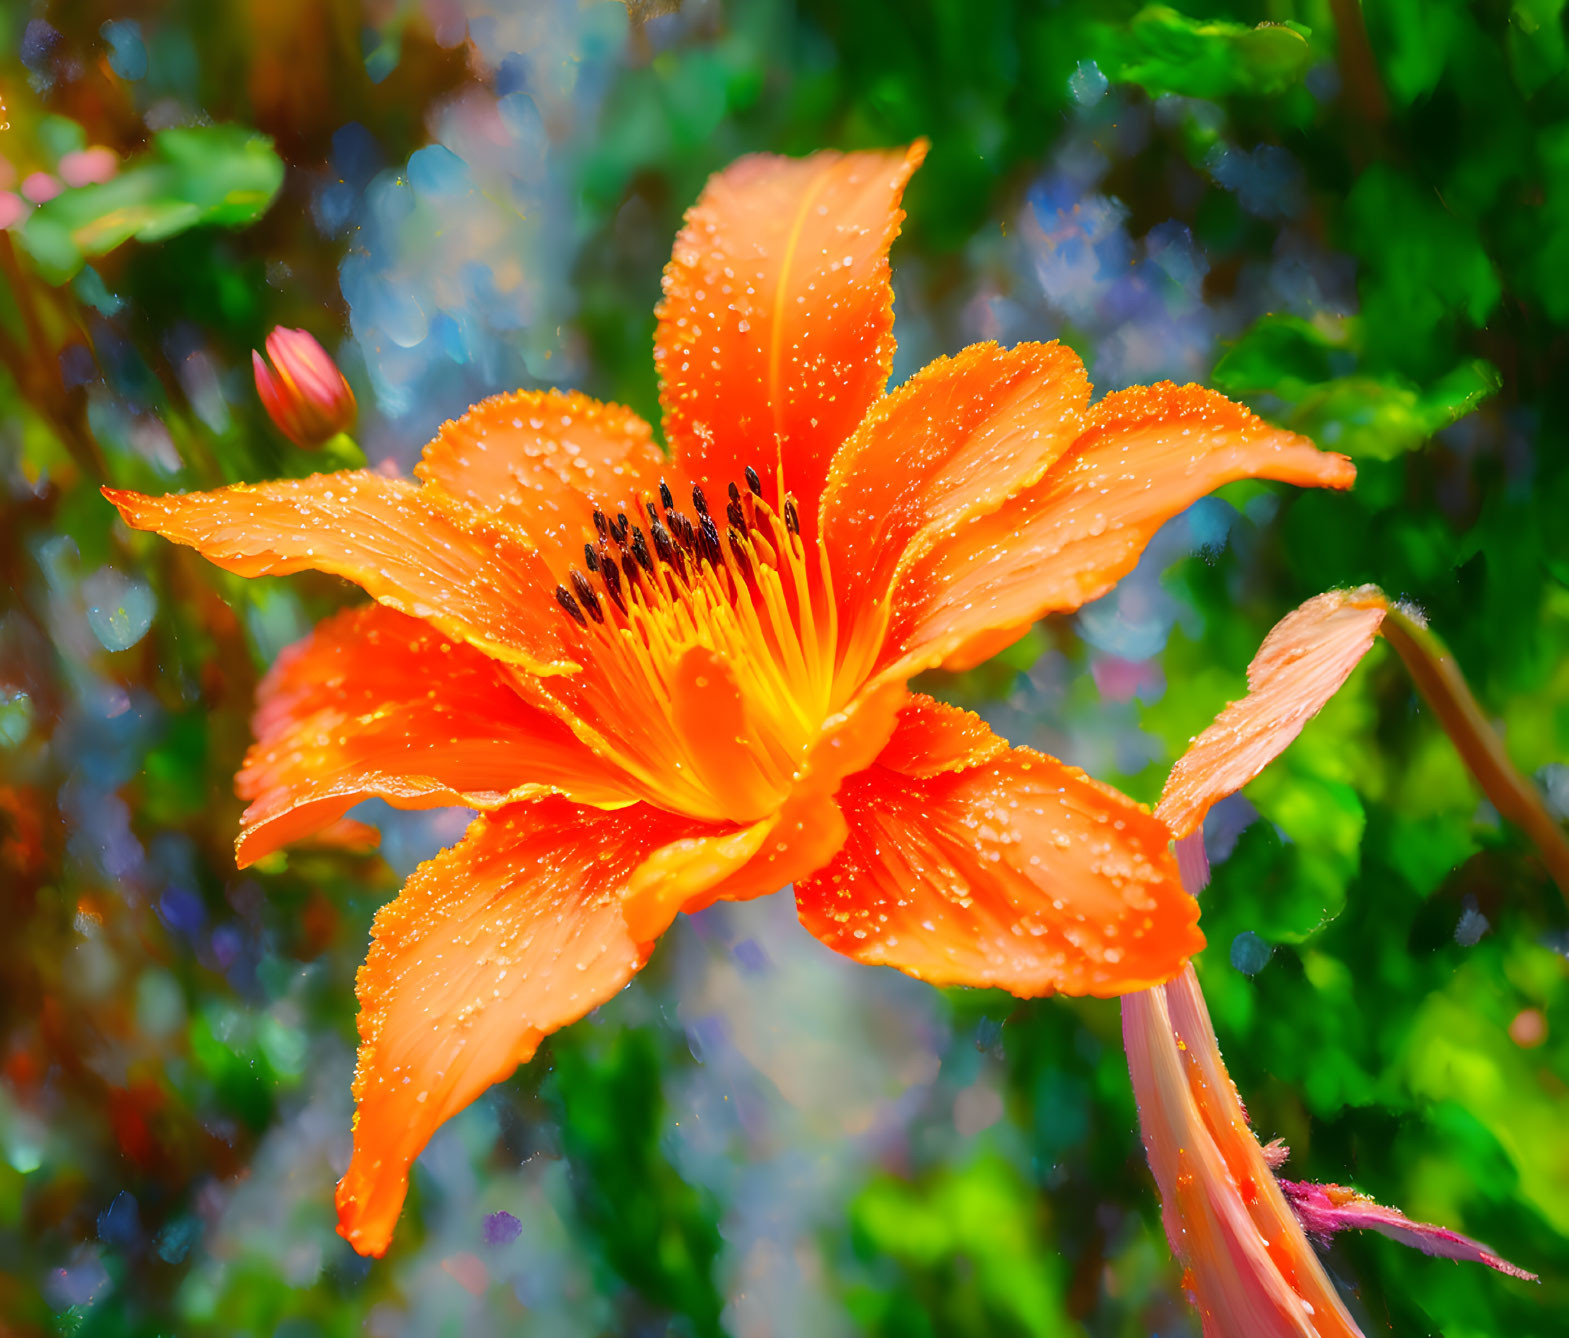 Vibrant Orange Lily with Water Droplets on Petals and Blurred Green Background